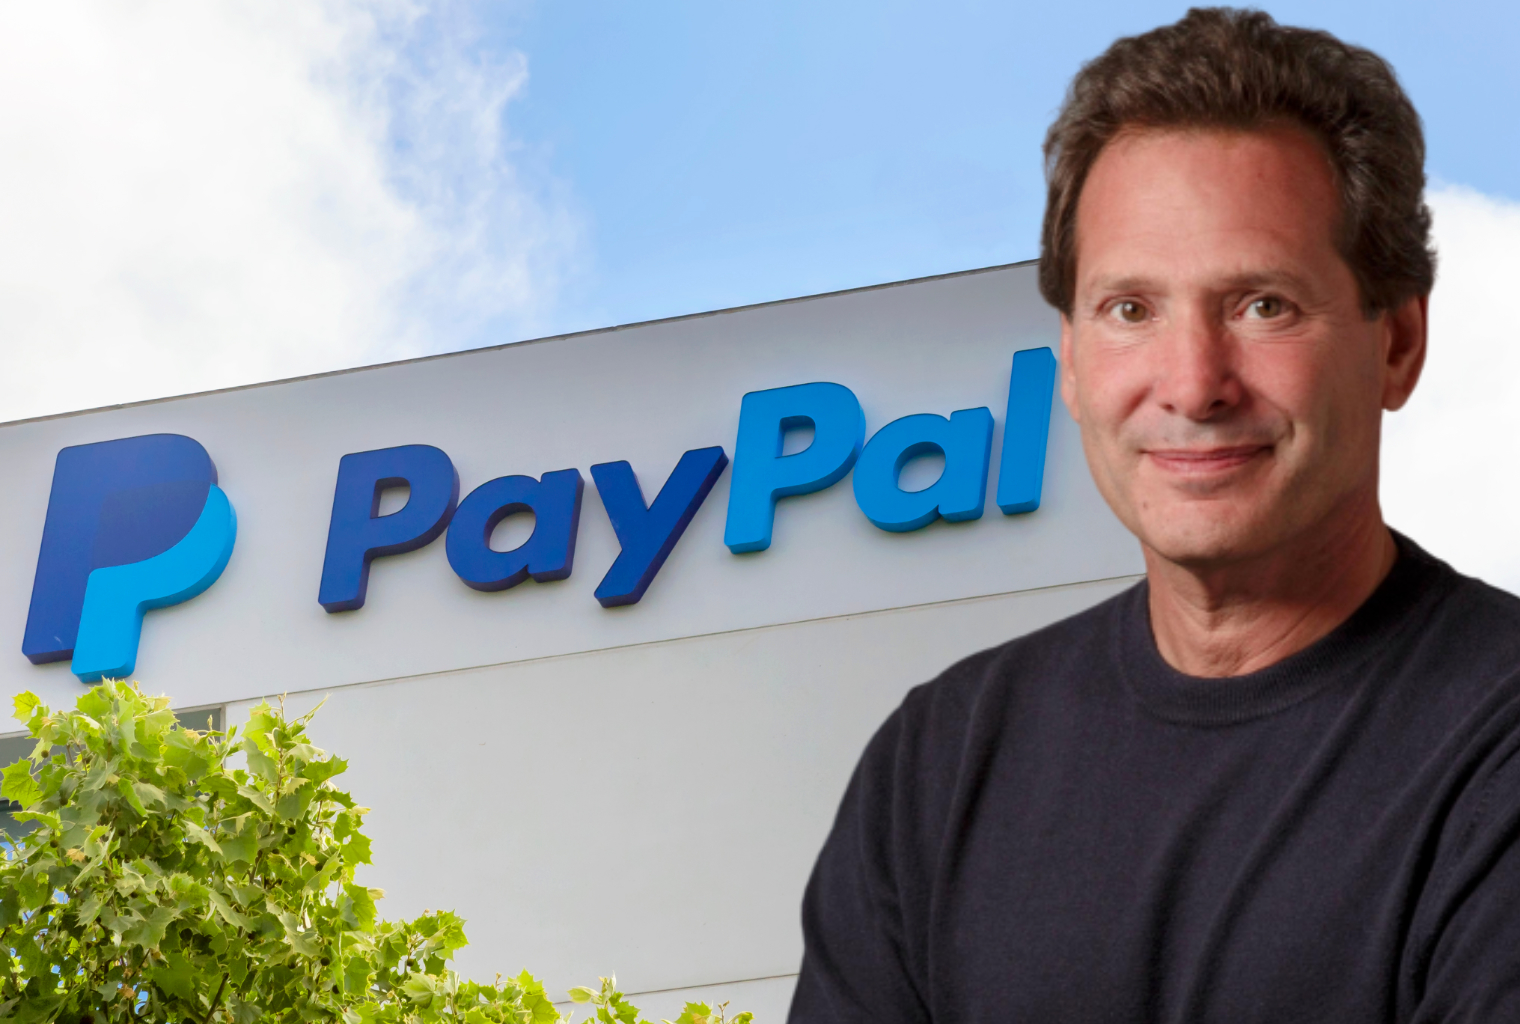 Paypal CEO Admits He Owns Bitcoin